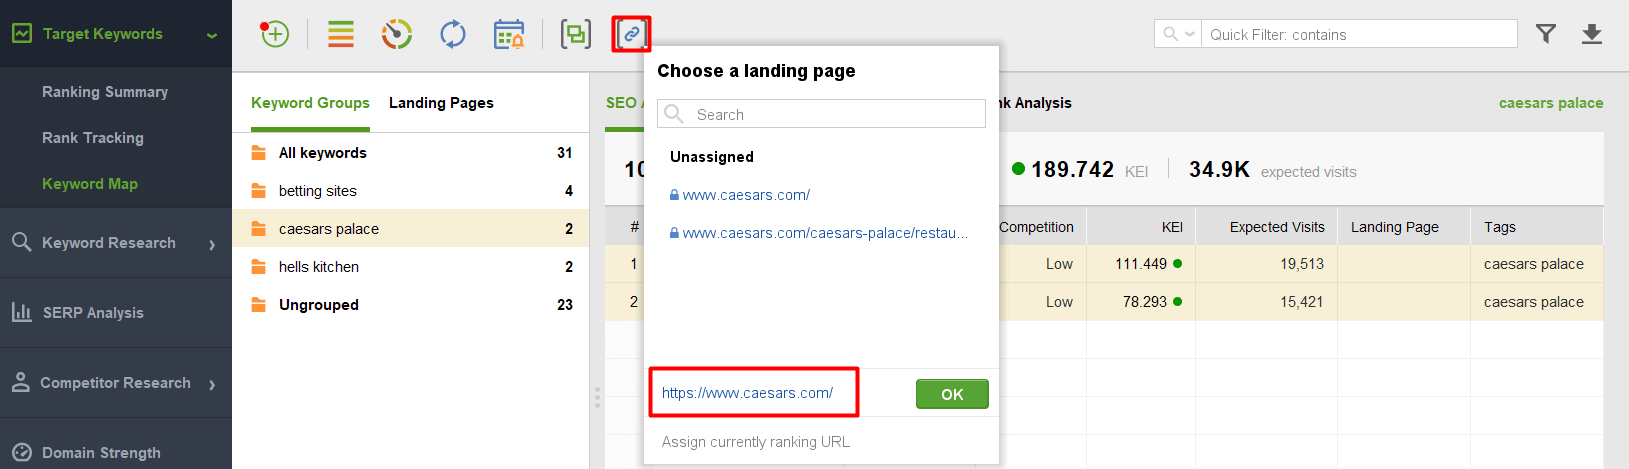 choosing a landing page for your new keywords